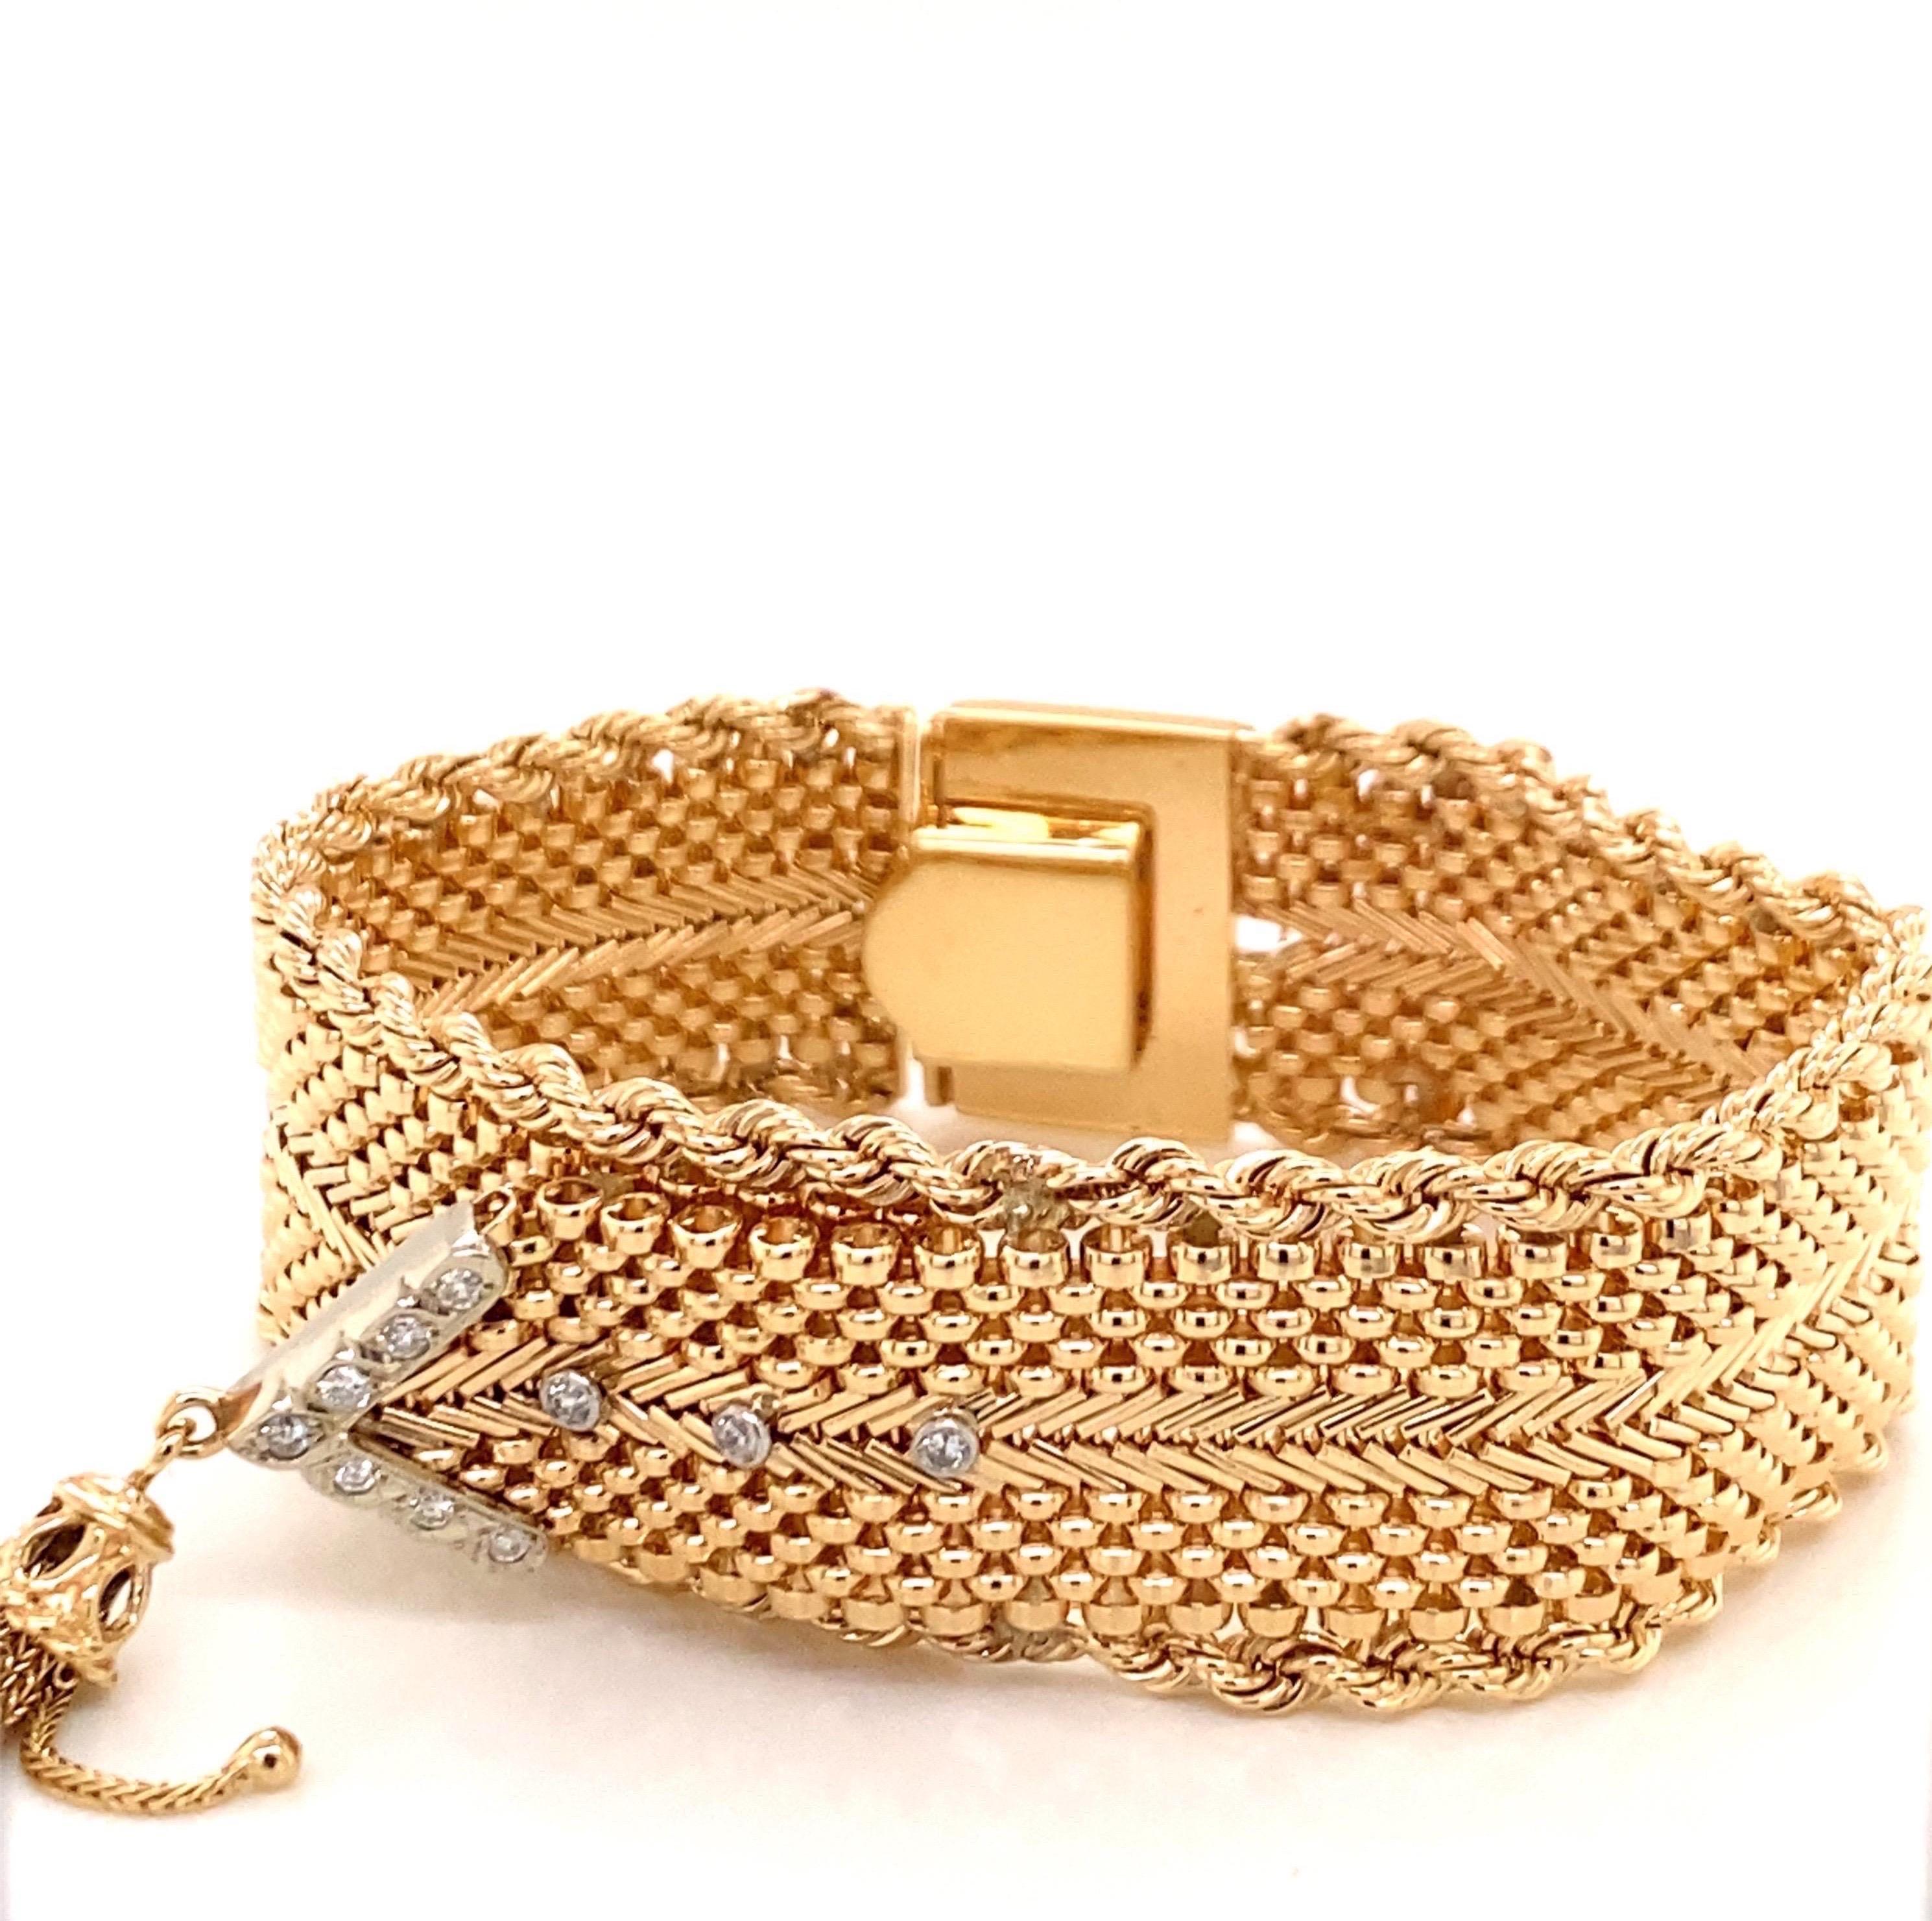 Vintage 1960's 14K Yellow Gold Mesh Belt Bracelet - The bracelet measures 6.9 inches long and .6 inches wide. The bracelet features a mesh design with a gold rope edge. The belt design has 10 round diamonds and a tassel hanging off the end. The